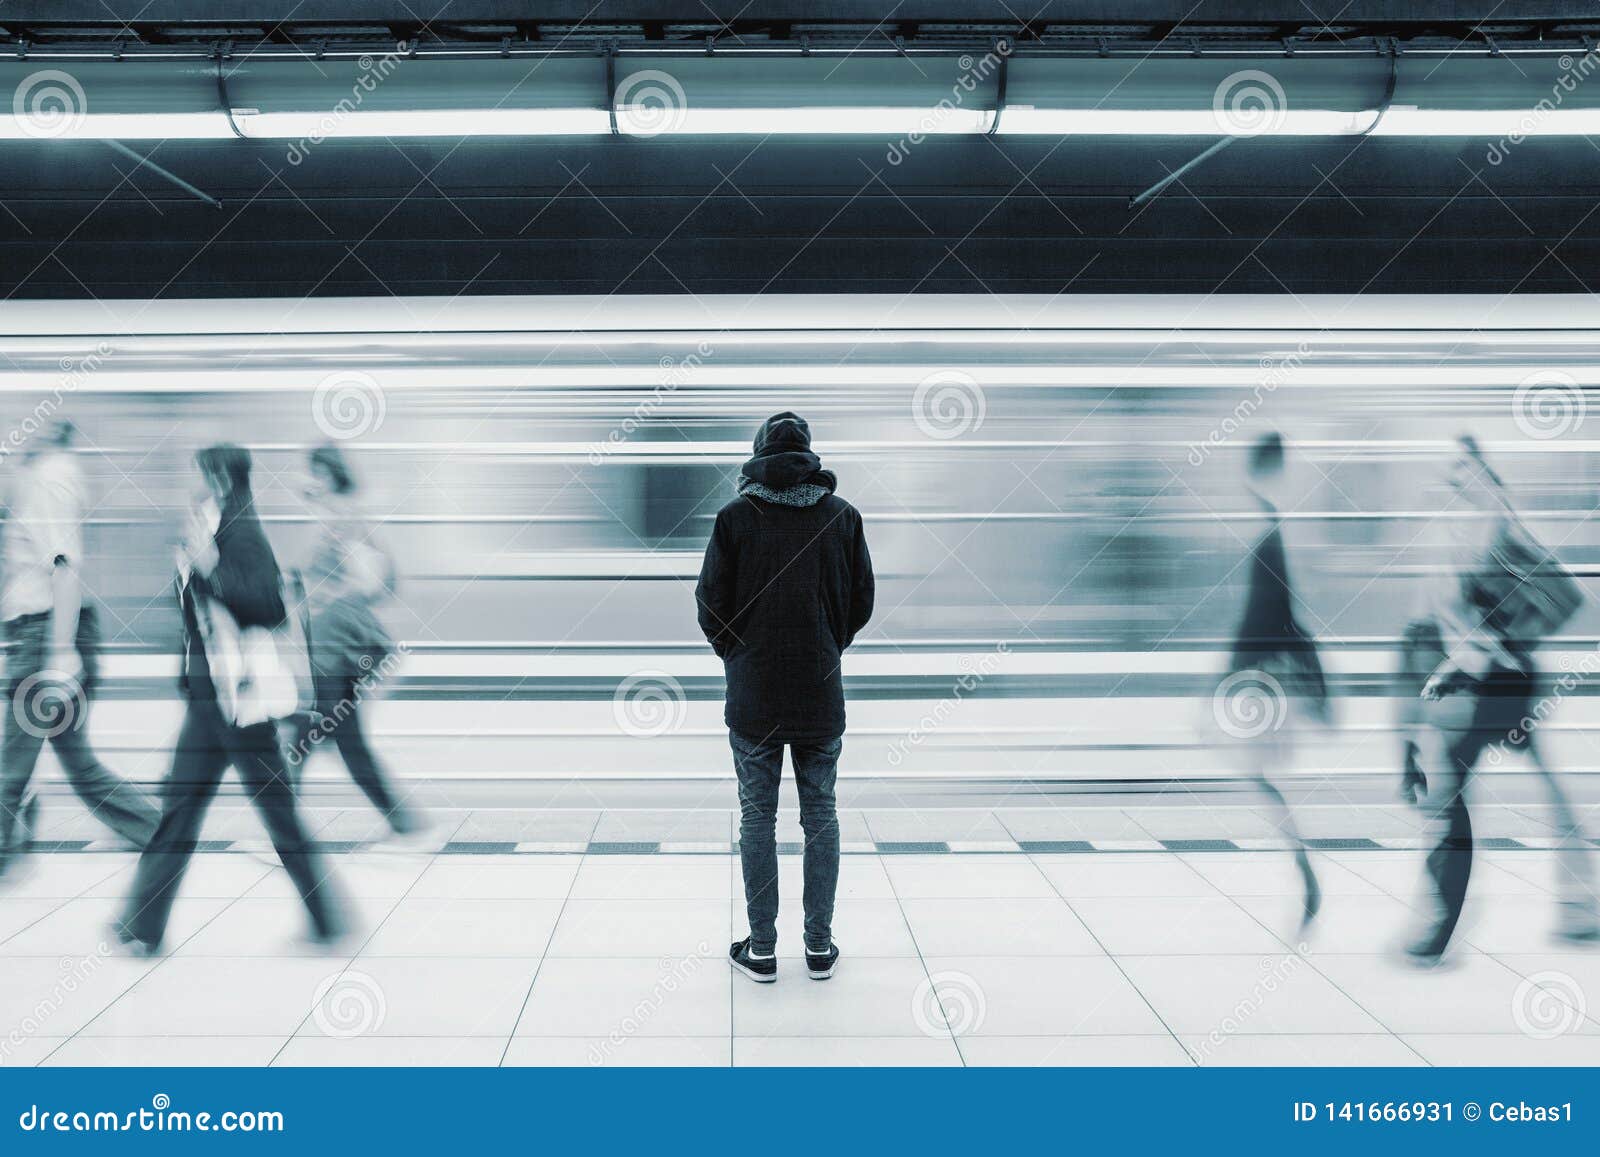 long exposure picture with lonely man at subway station with blurry moving train and walking people